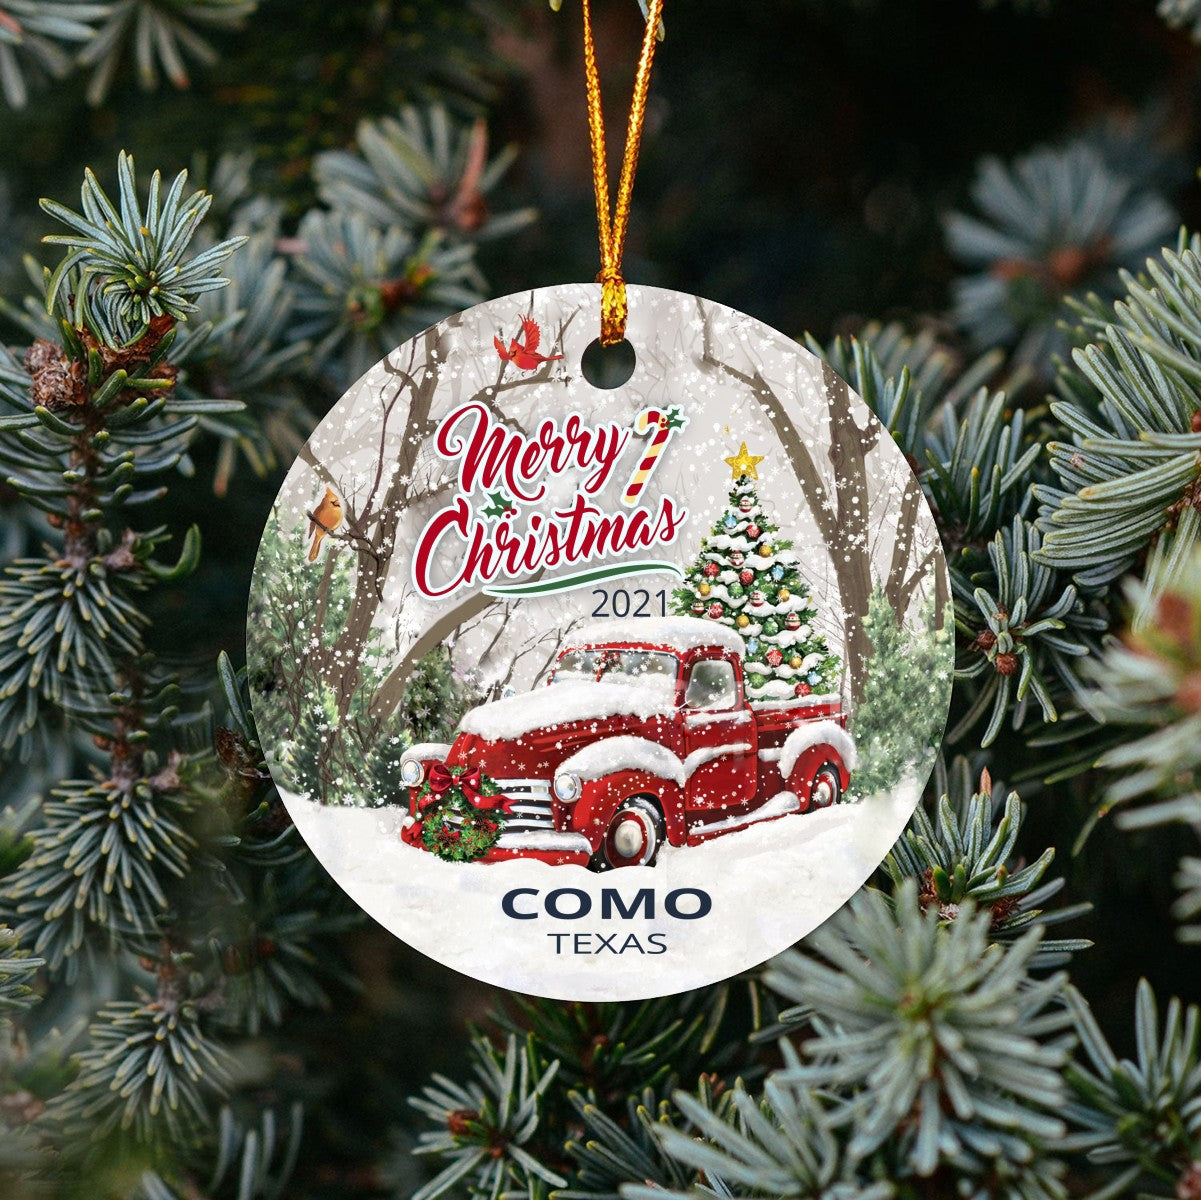 Christmas Tree Ornaments Como - Ornament With Name City, State Como Texas TX Ornament - Red Truck Xmas Ornaments 3'' Plastic Gift For Family, Friend And Housewarming